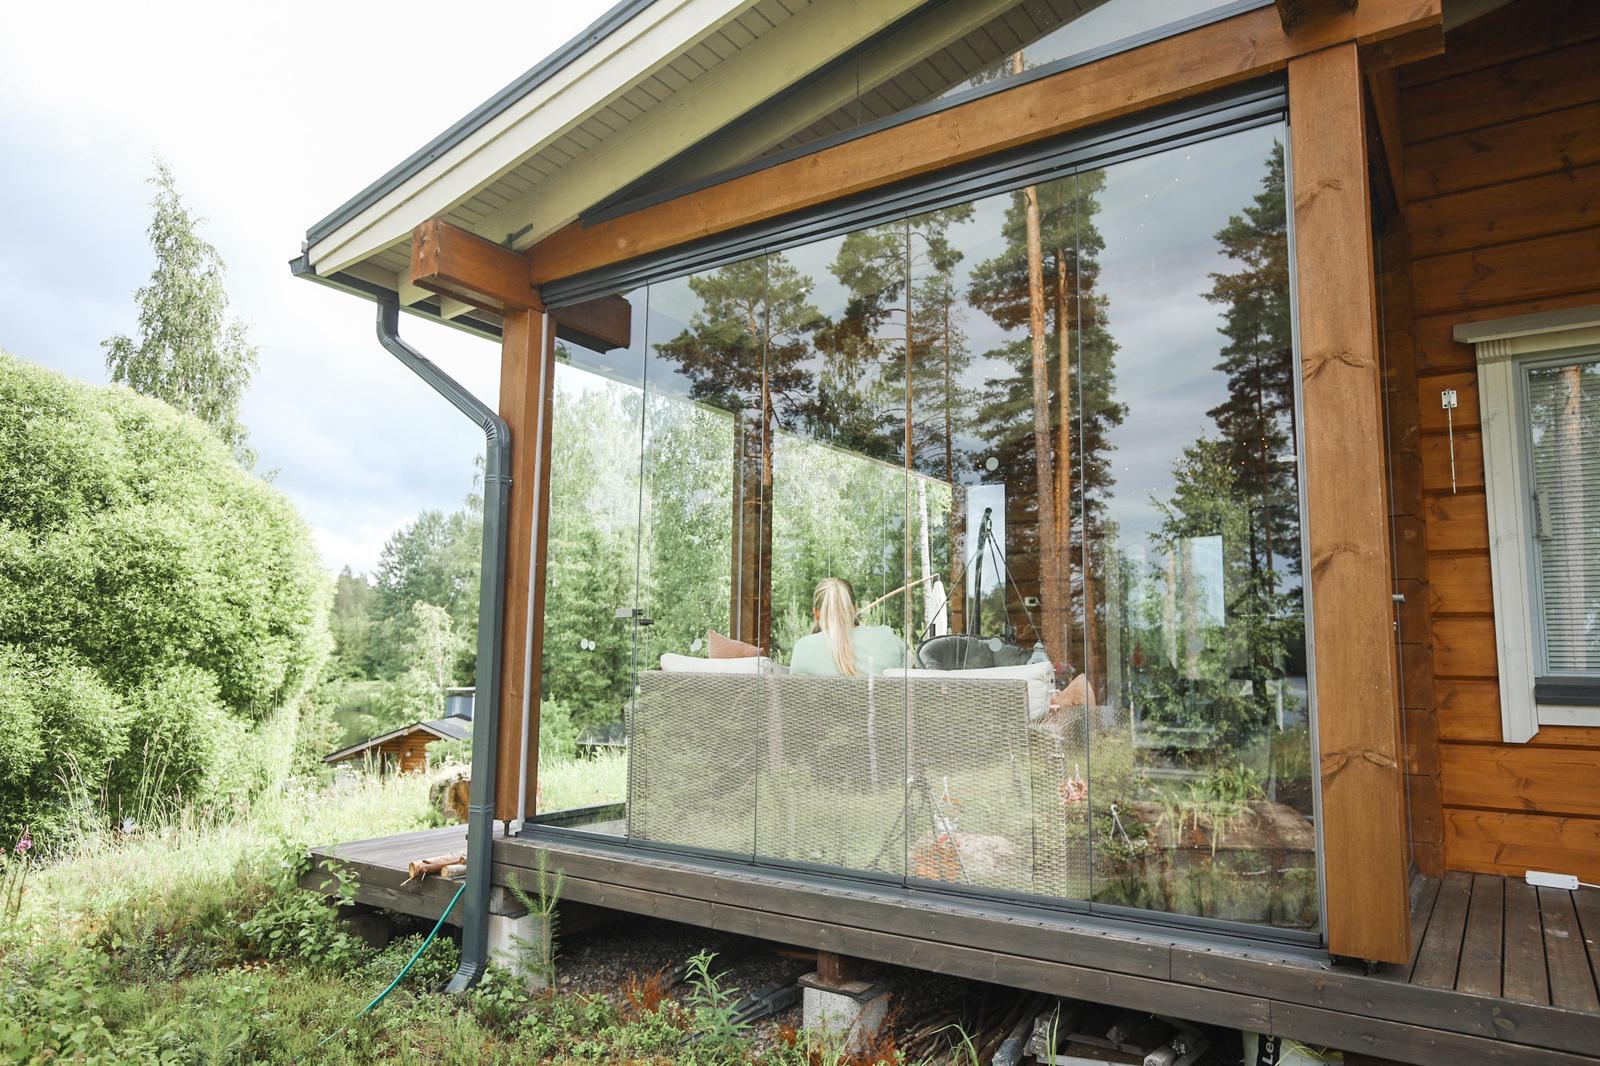 Glazed outdoor space at a summer cottage pictured from the outside